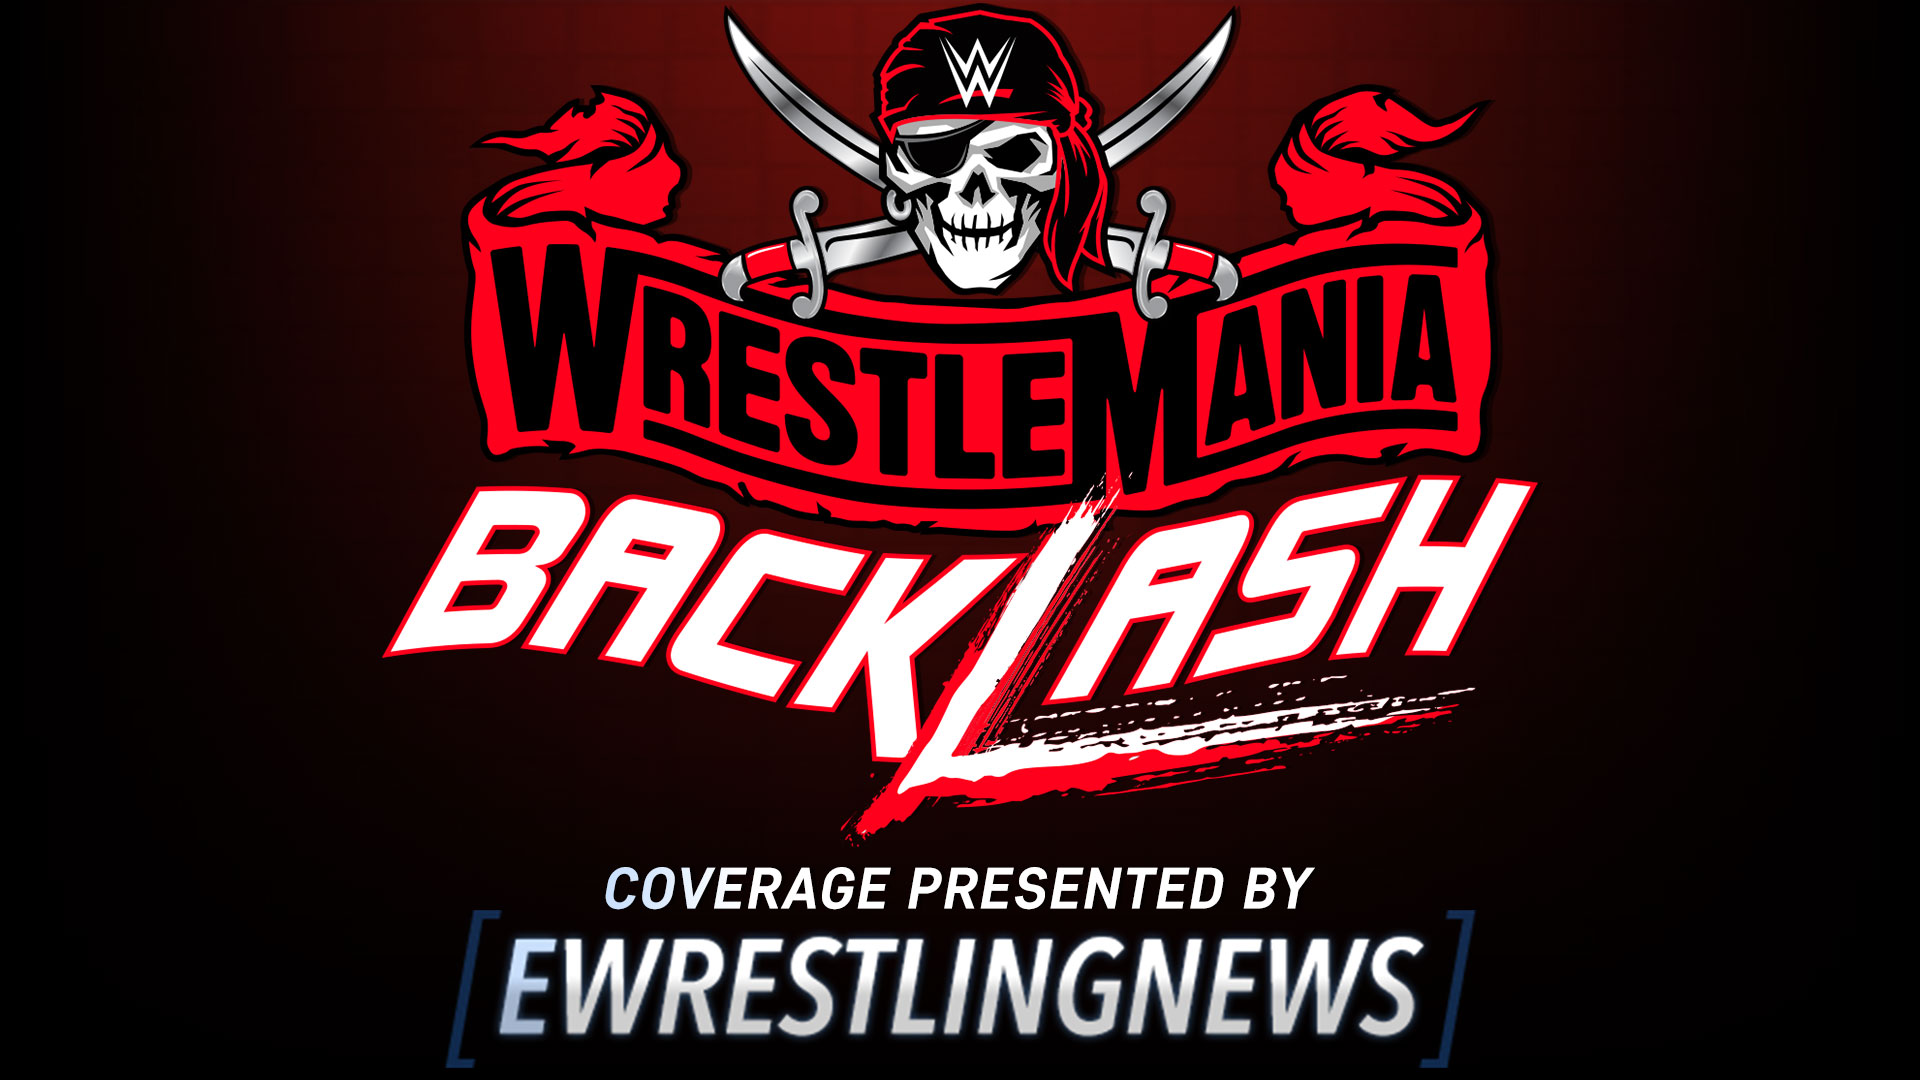 WWE WrestleMania Backlash 2021 Results, Viewing Party & More